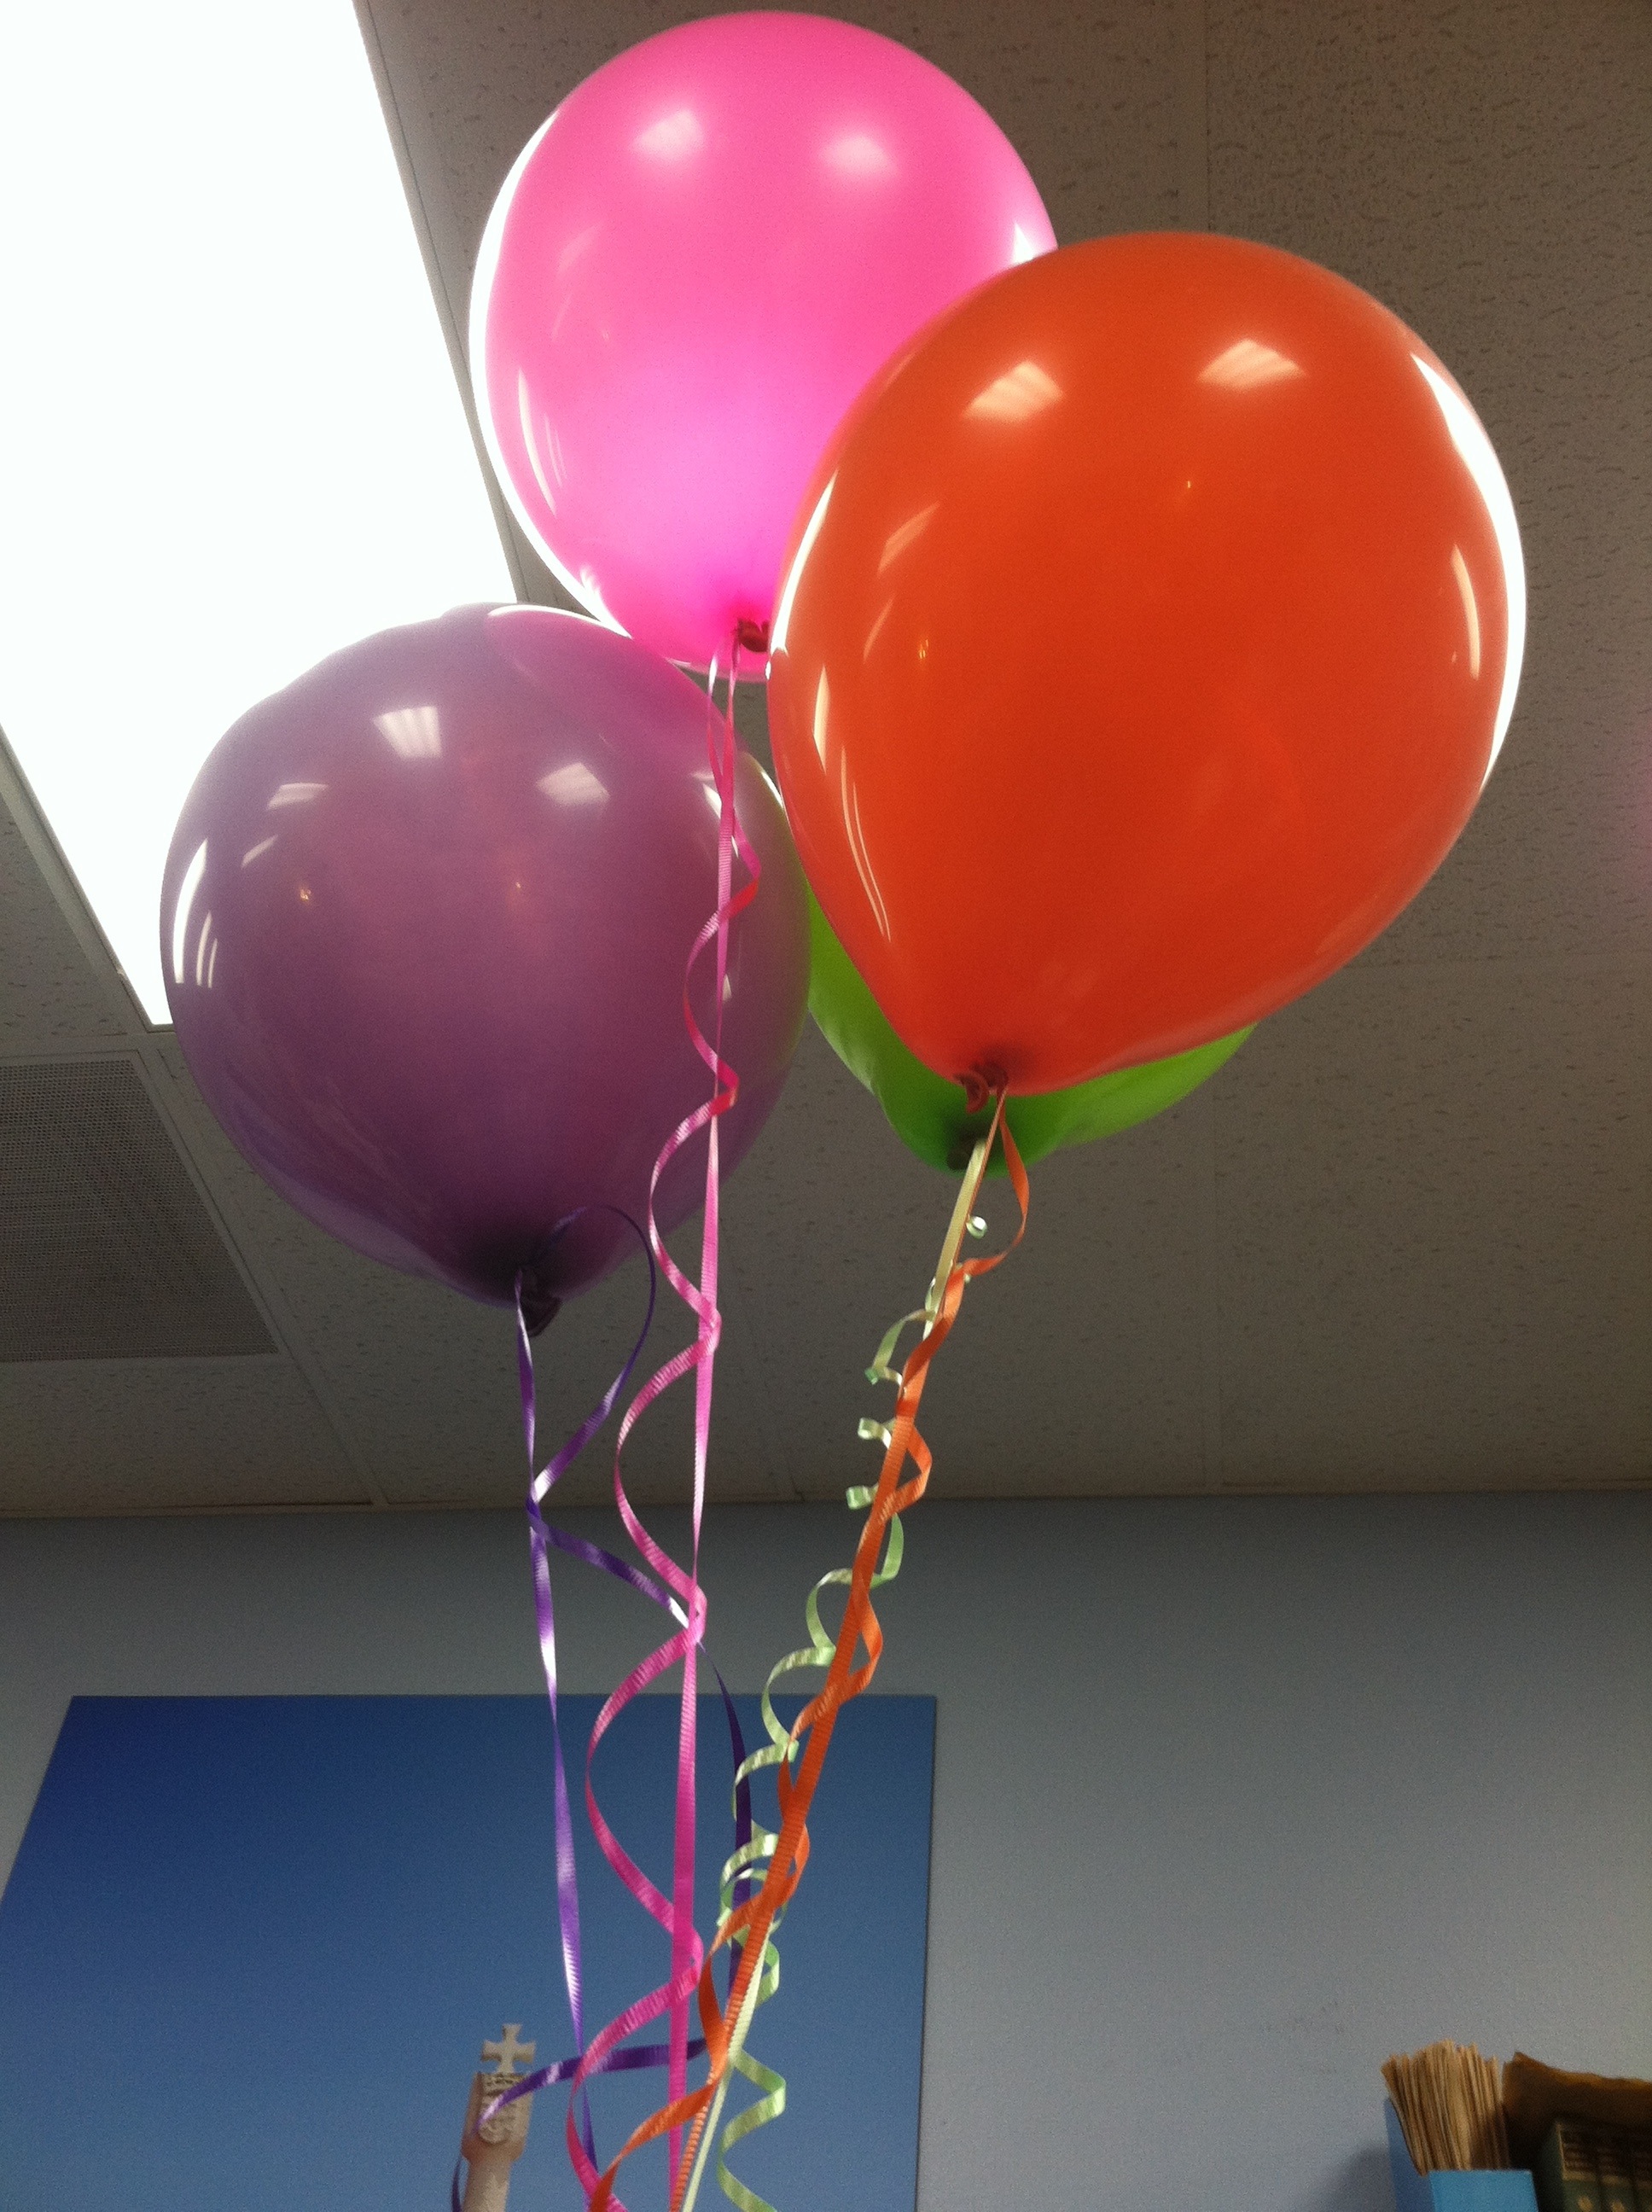 And balloons!